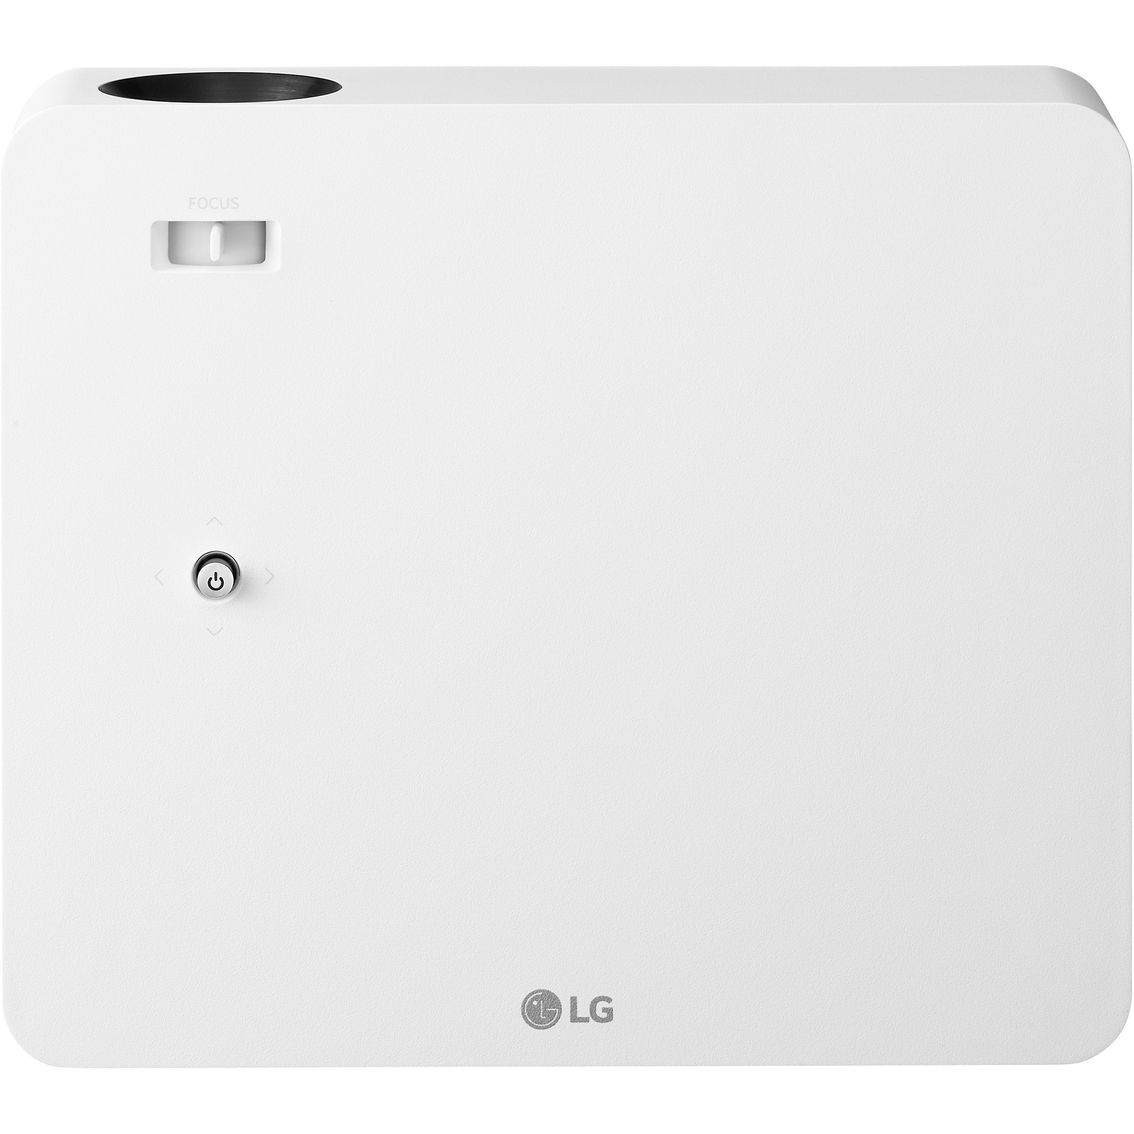 LG PF610P Full HD LED Portable Smart Projector - Image 5 of 10